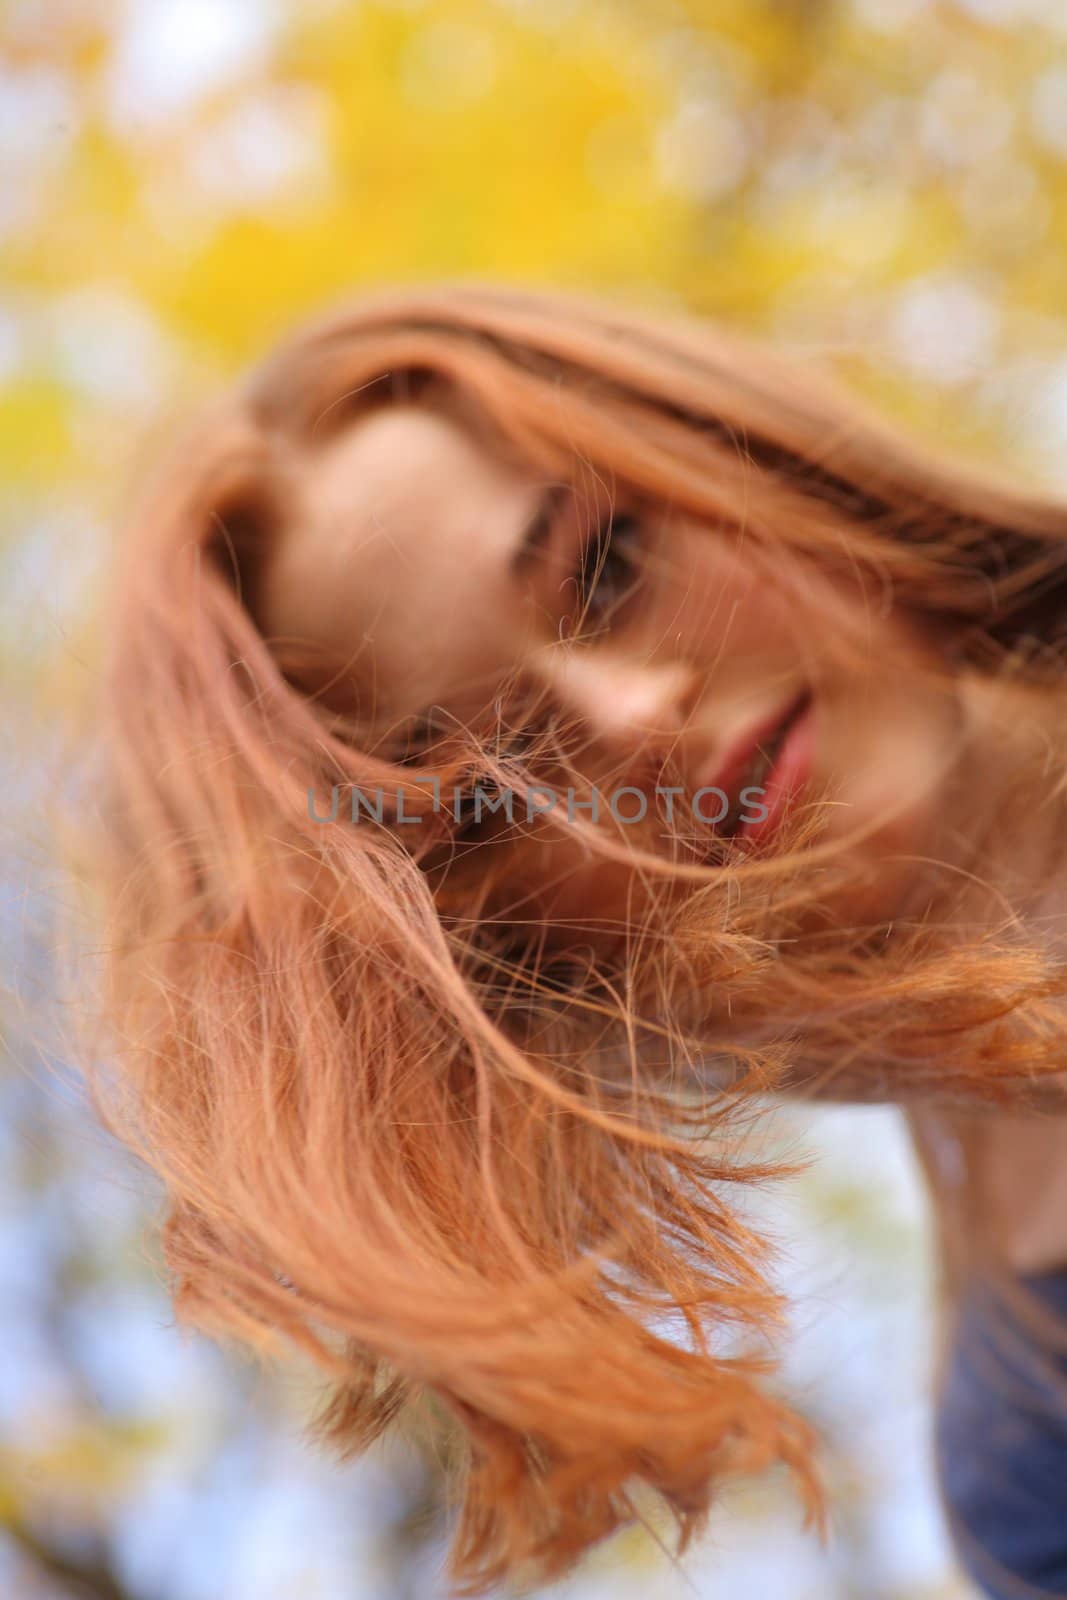 Portrait of a beautiful redhead girl smiling outdoors